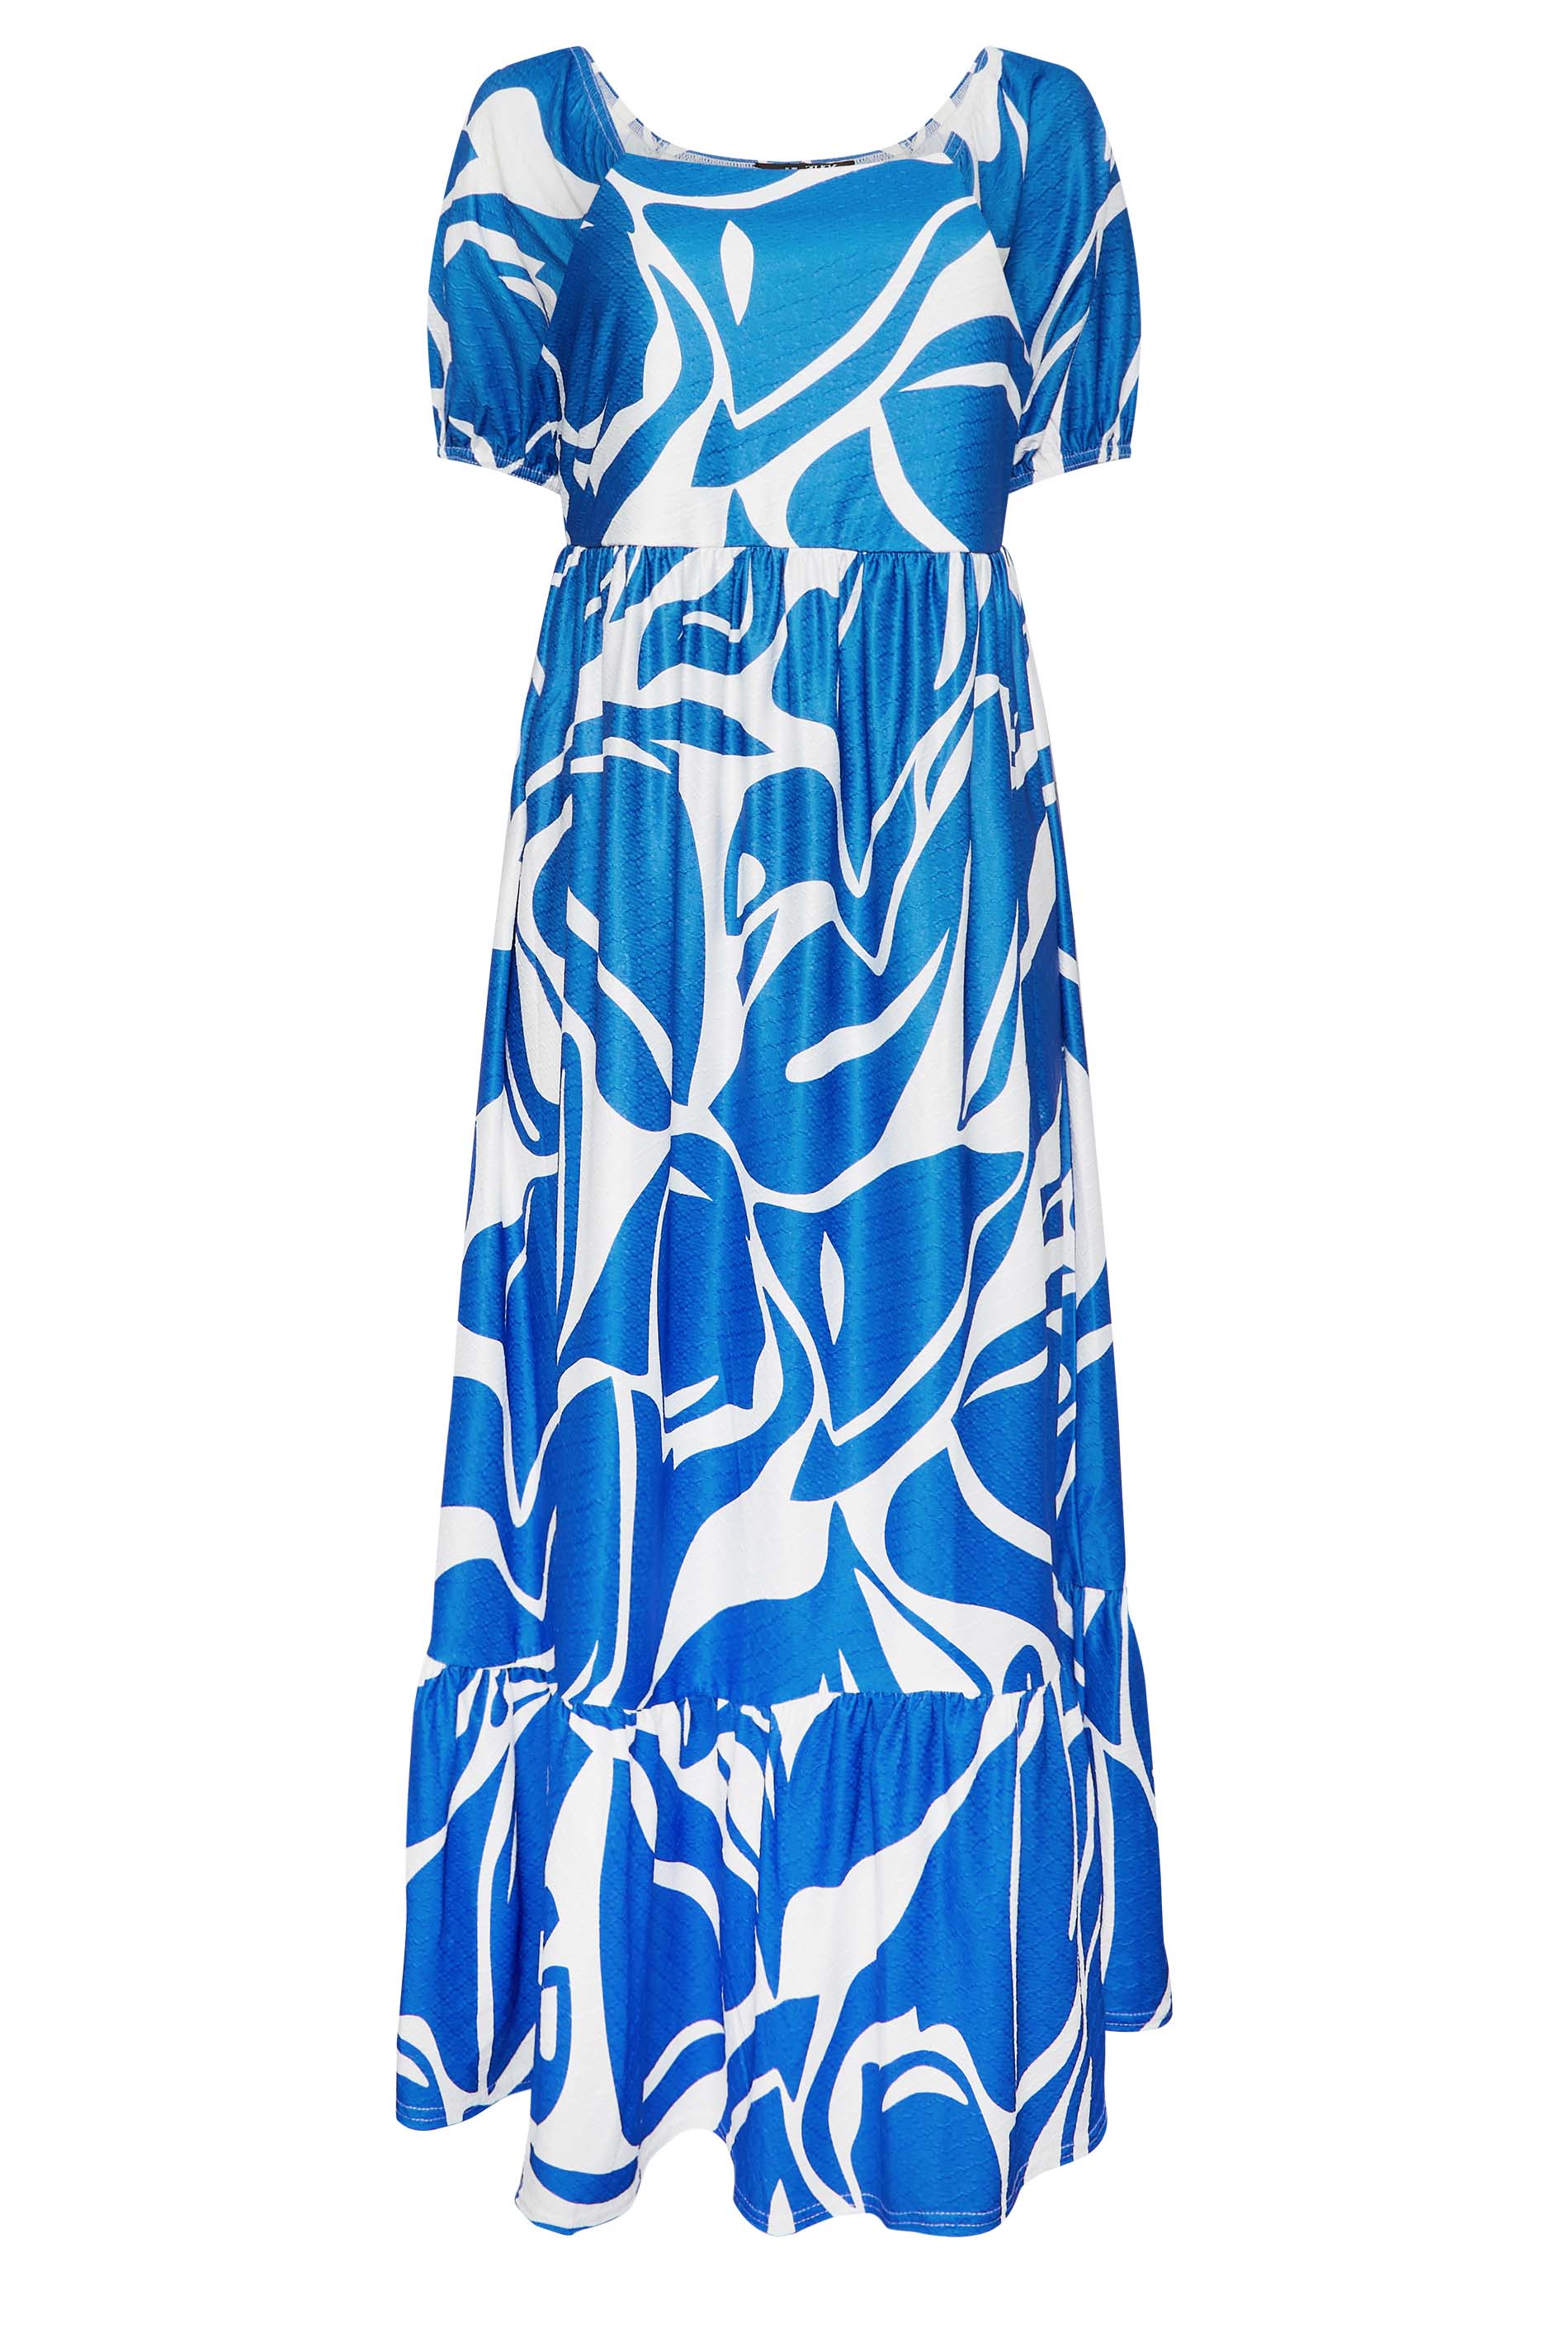 YOURS Plus Size Blue Swirl Print Maxi Dress | Yours Clothing